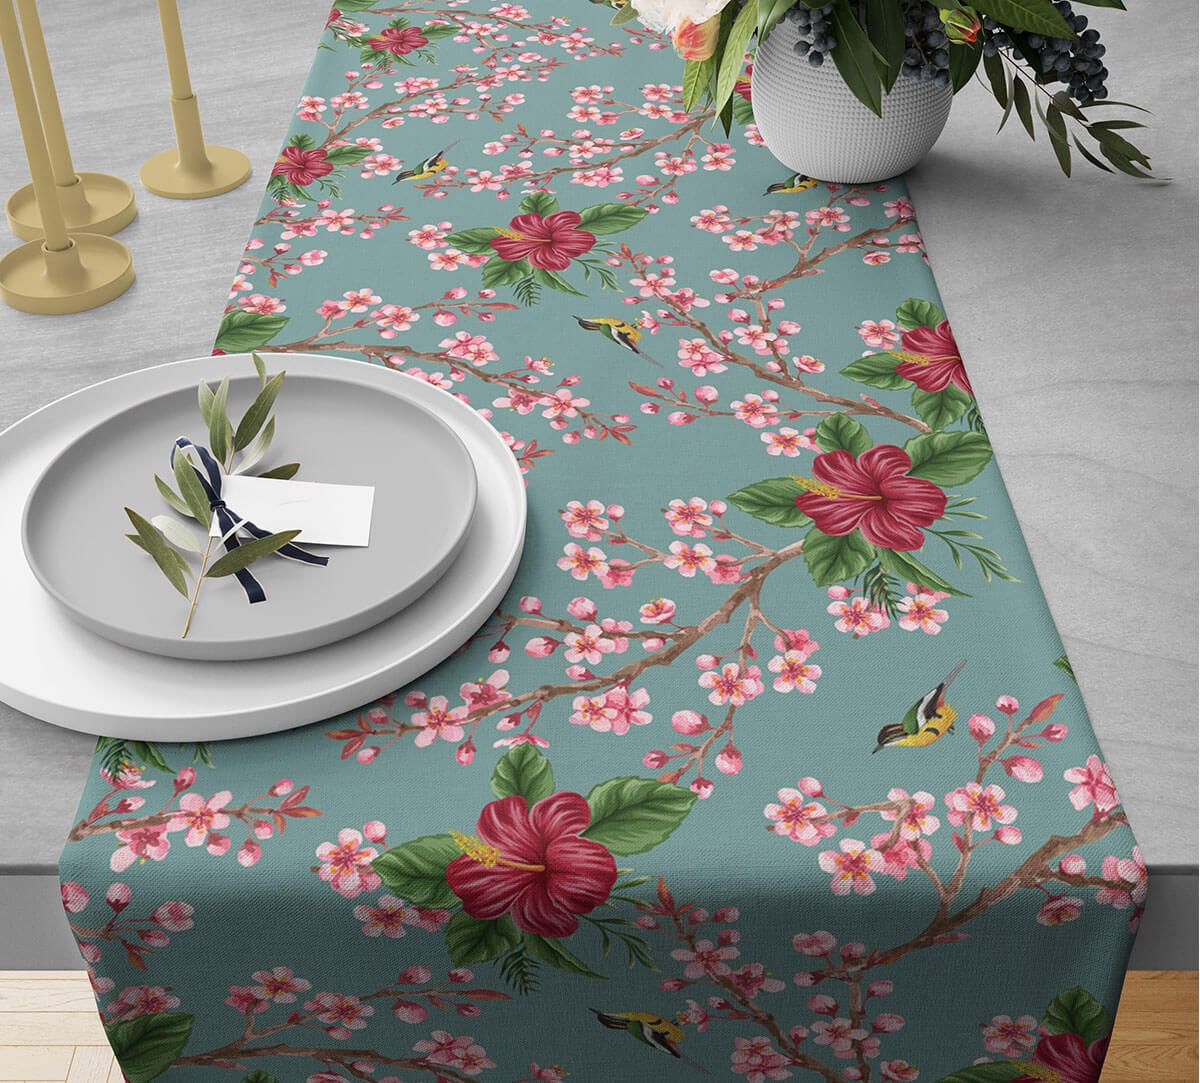 Perching Floral Paradise Table Runner